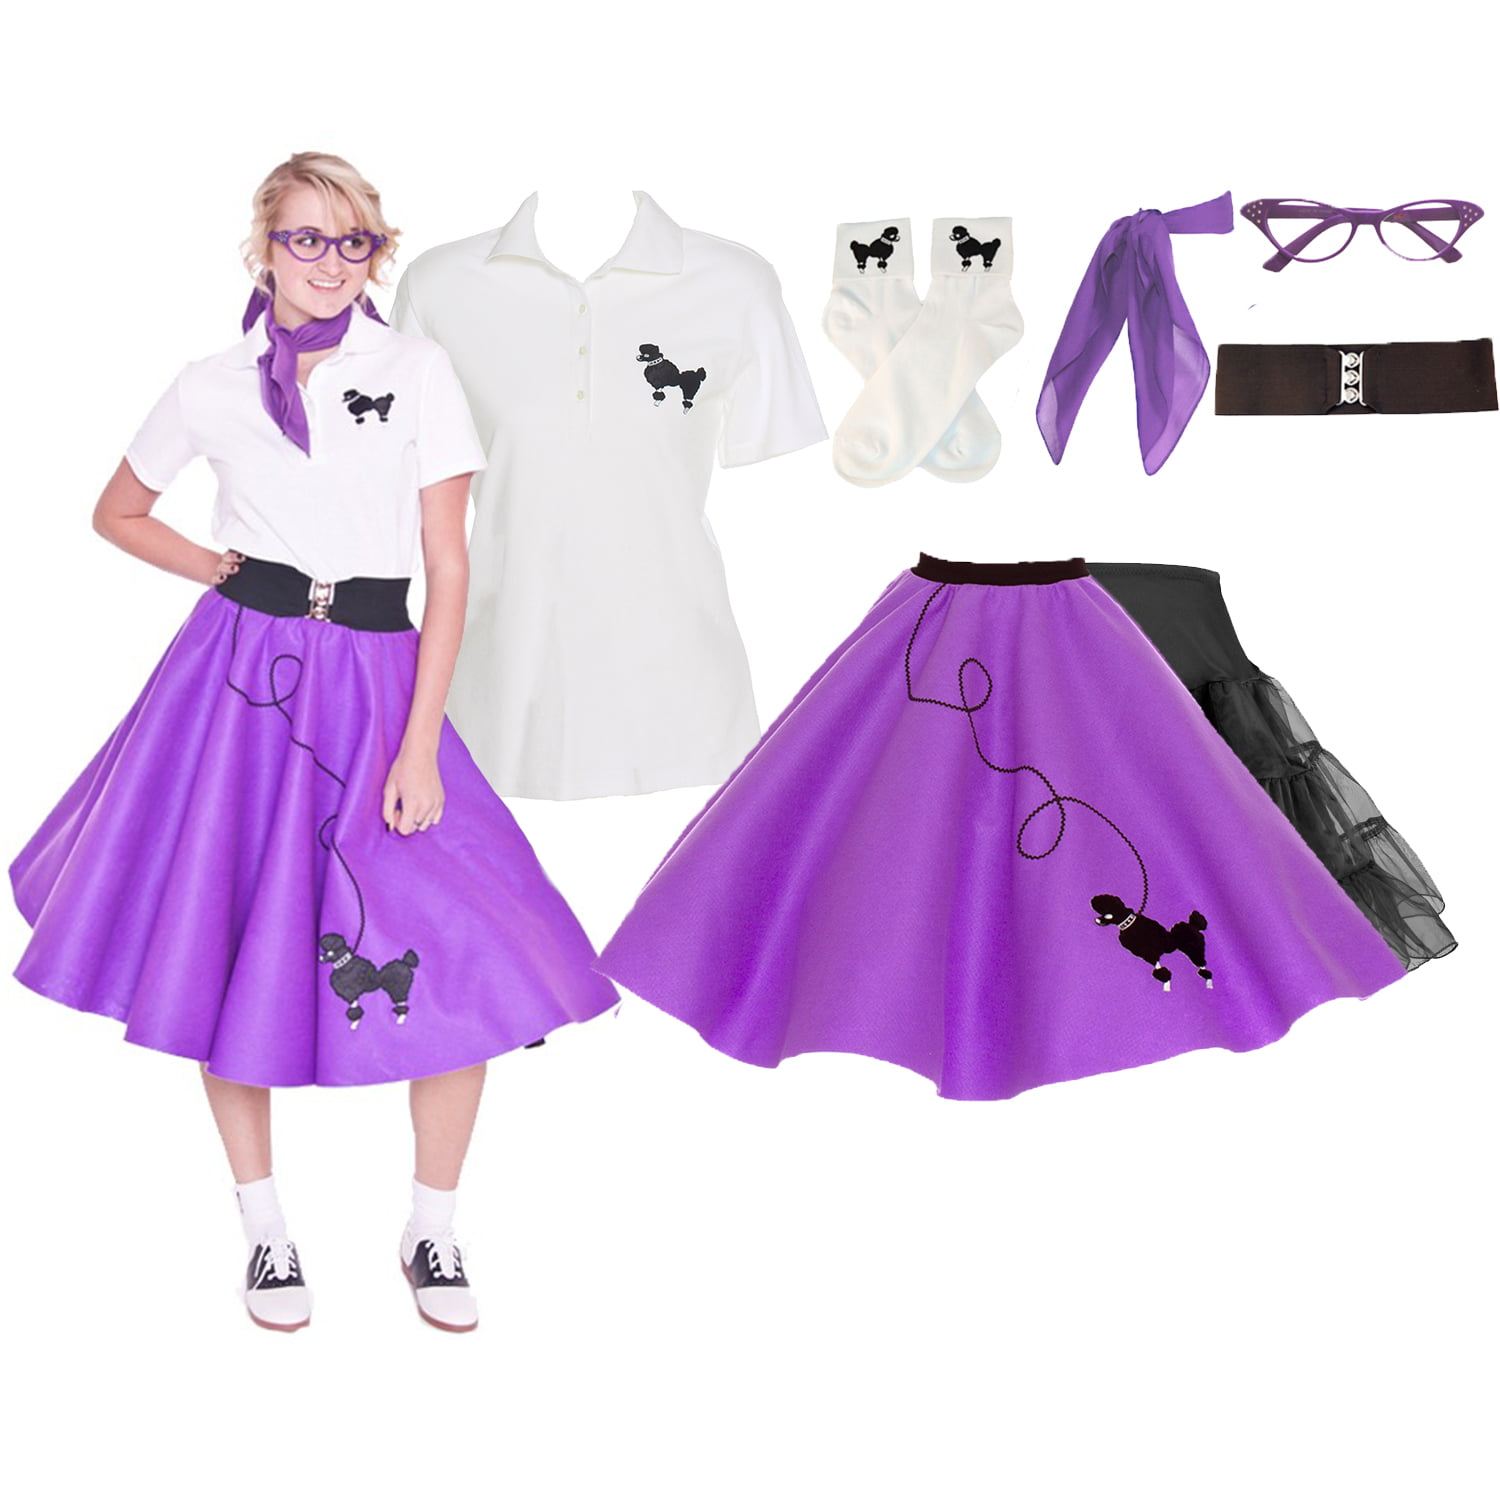 7 PC LAVENDER 50's POODLE SKIRT OUTFIT ADULT Size LARGE Length 25" 